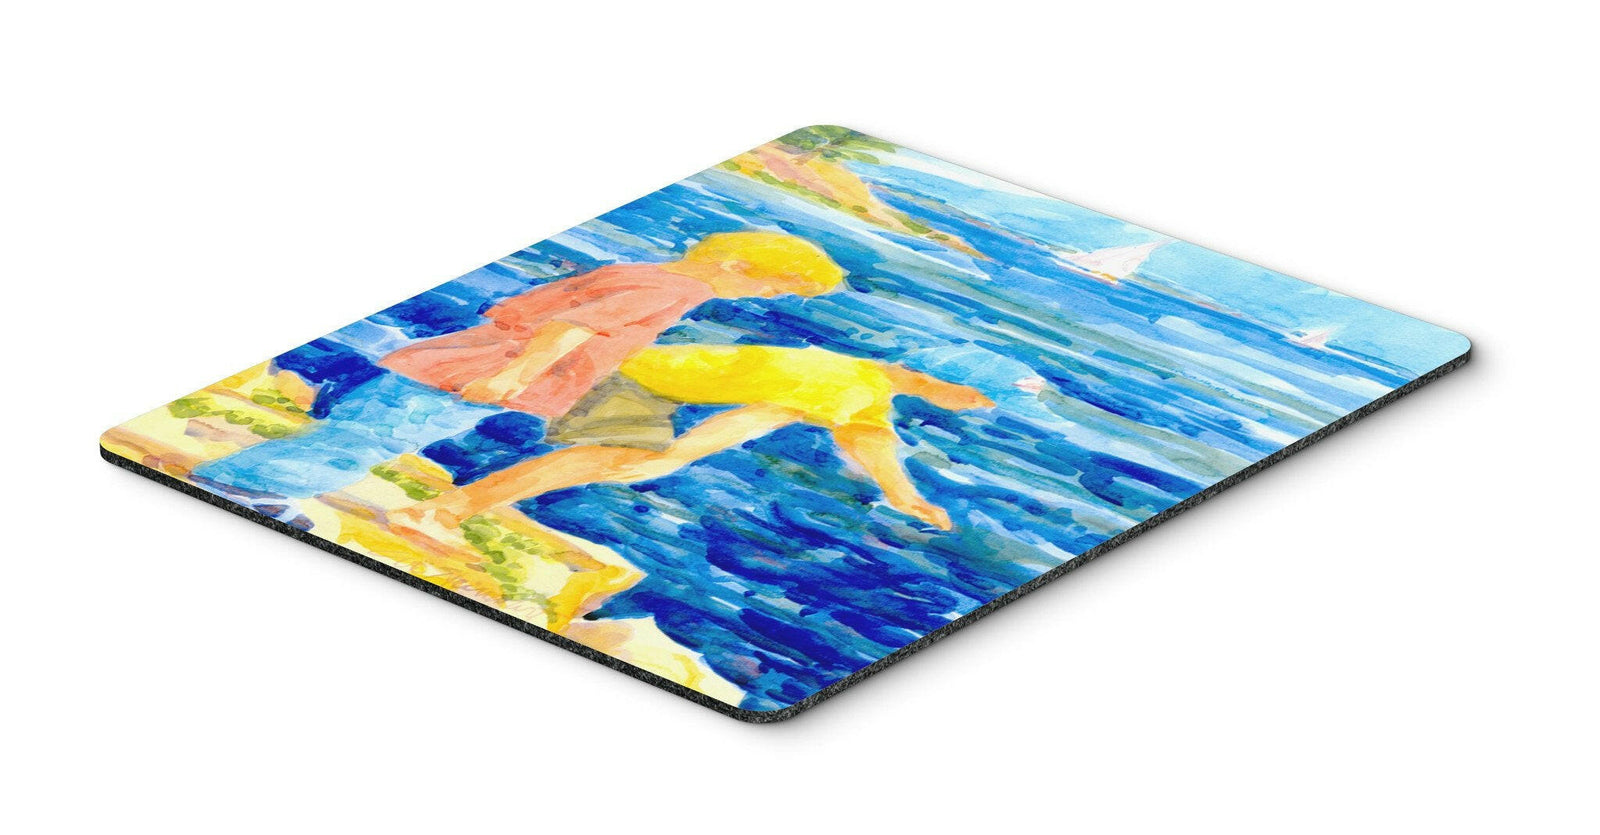 The Boys at the lake or beach  Mouse Pad, Hot Pad or Trivet by Caroline's Treasures